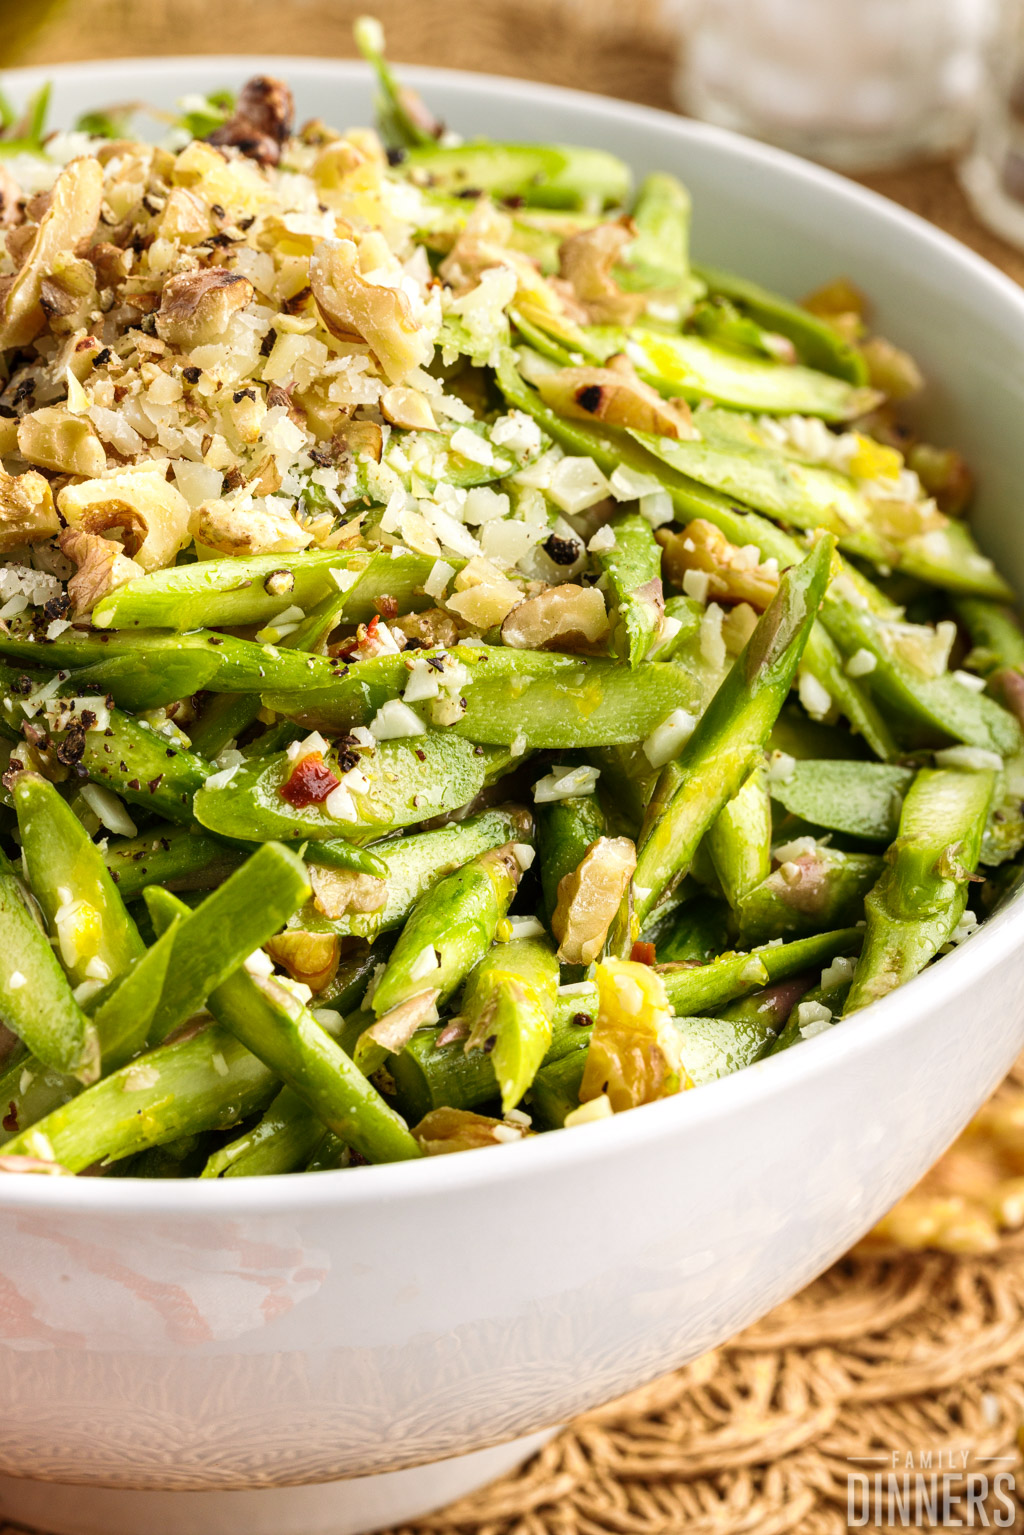 Raw asparagus salad with walnuts and parmesan cheese on top.